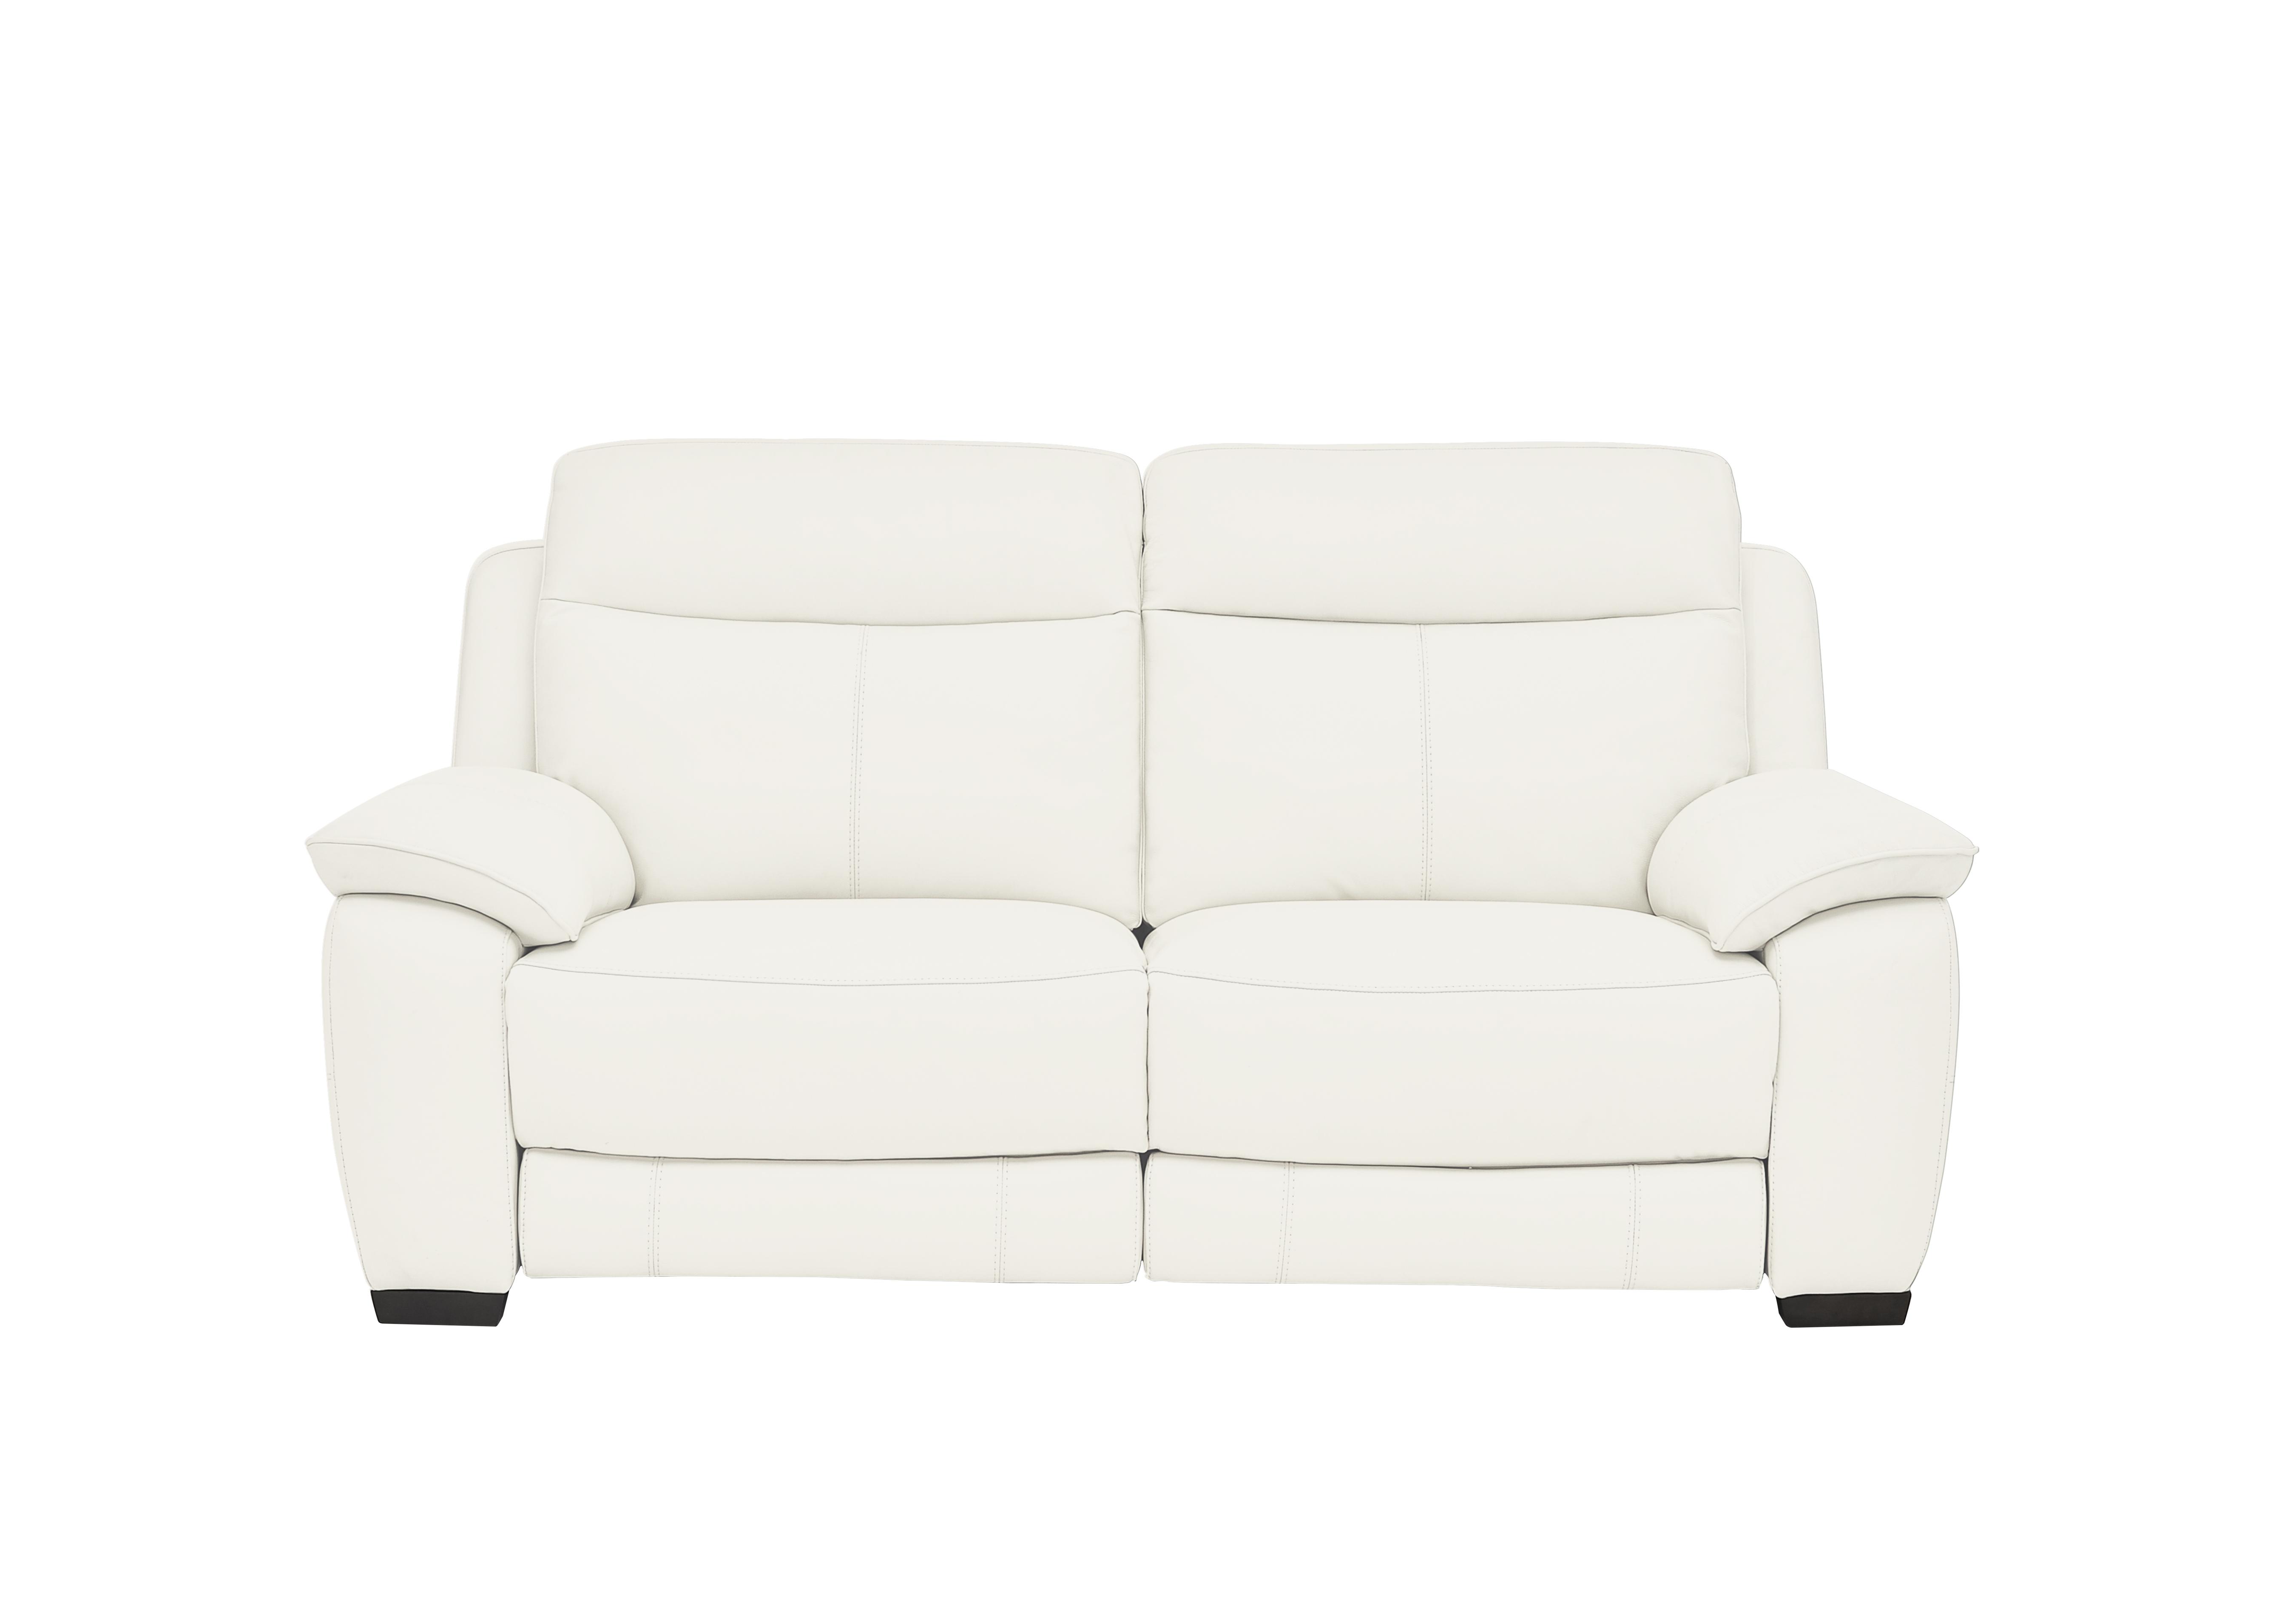 Starlight Express 2 Seater Leather Sofa in Bv-744d Star White on Furniture Village